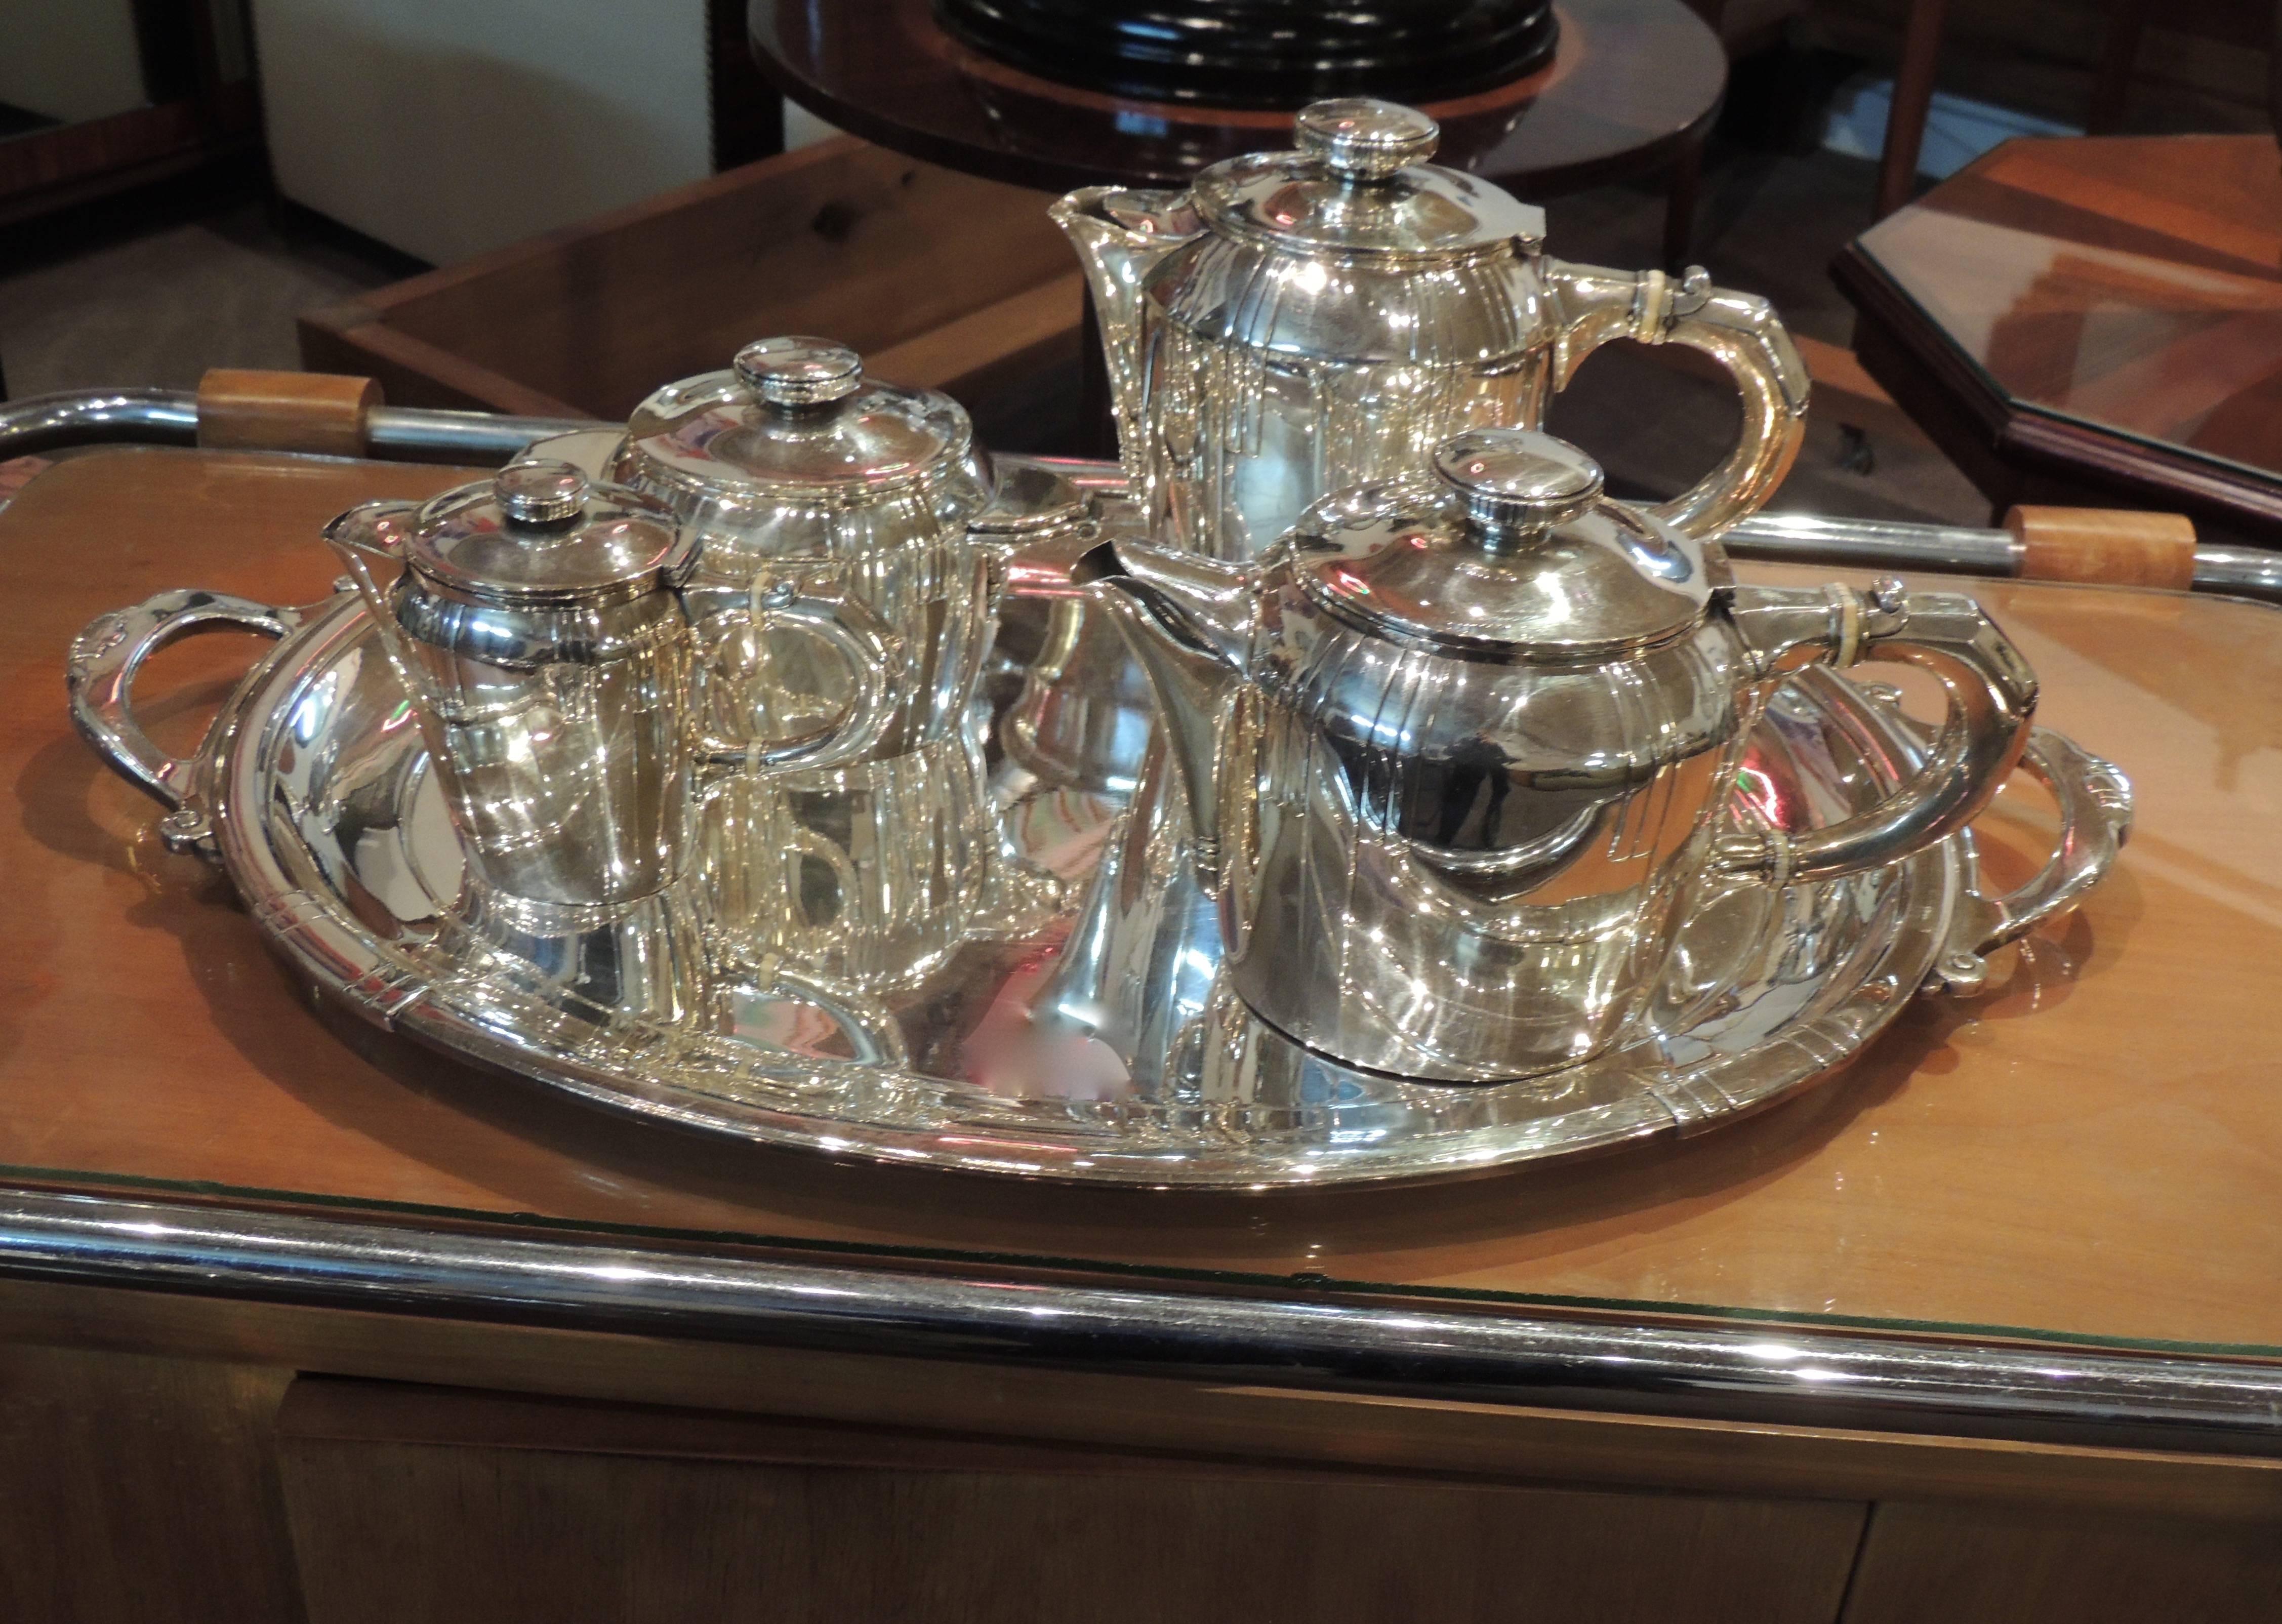 Complete French Art Deco silver plate tea and coffee Set from the “Golden Age” of Buenos Aires when the city was one of the richest in the world and brimming with the artistic influence of Europe. There was a fashion for English High Tea, offered